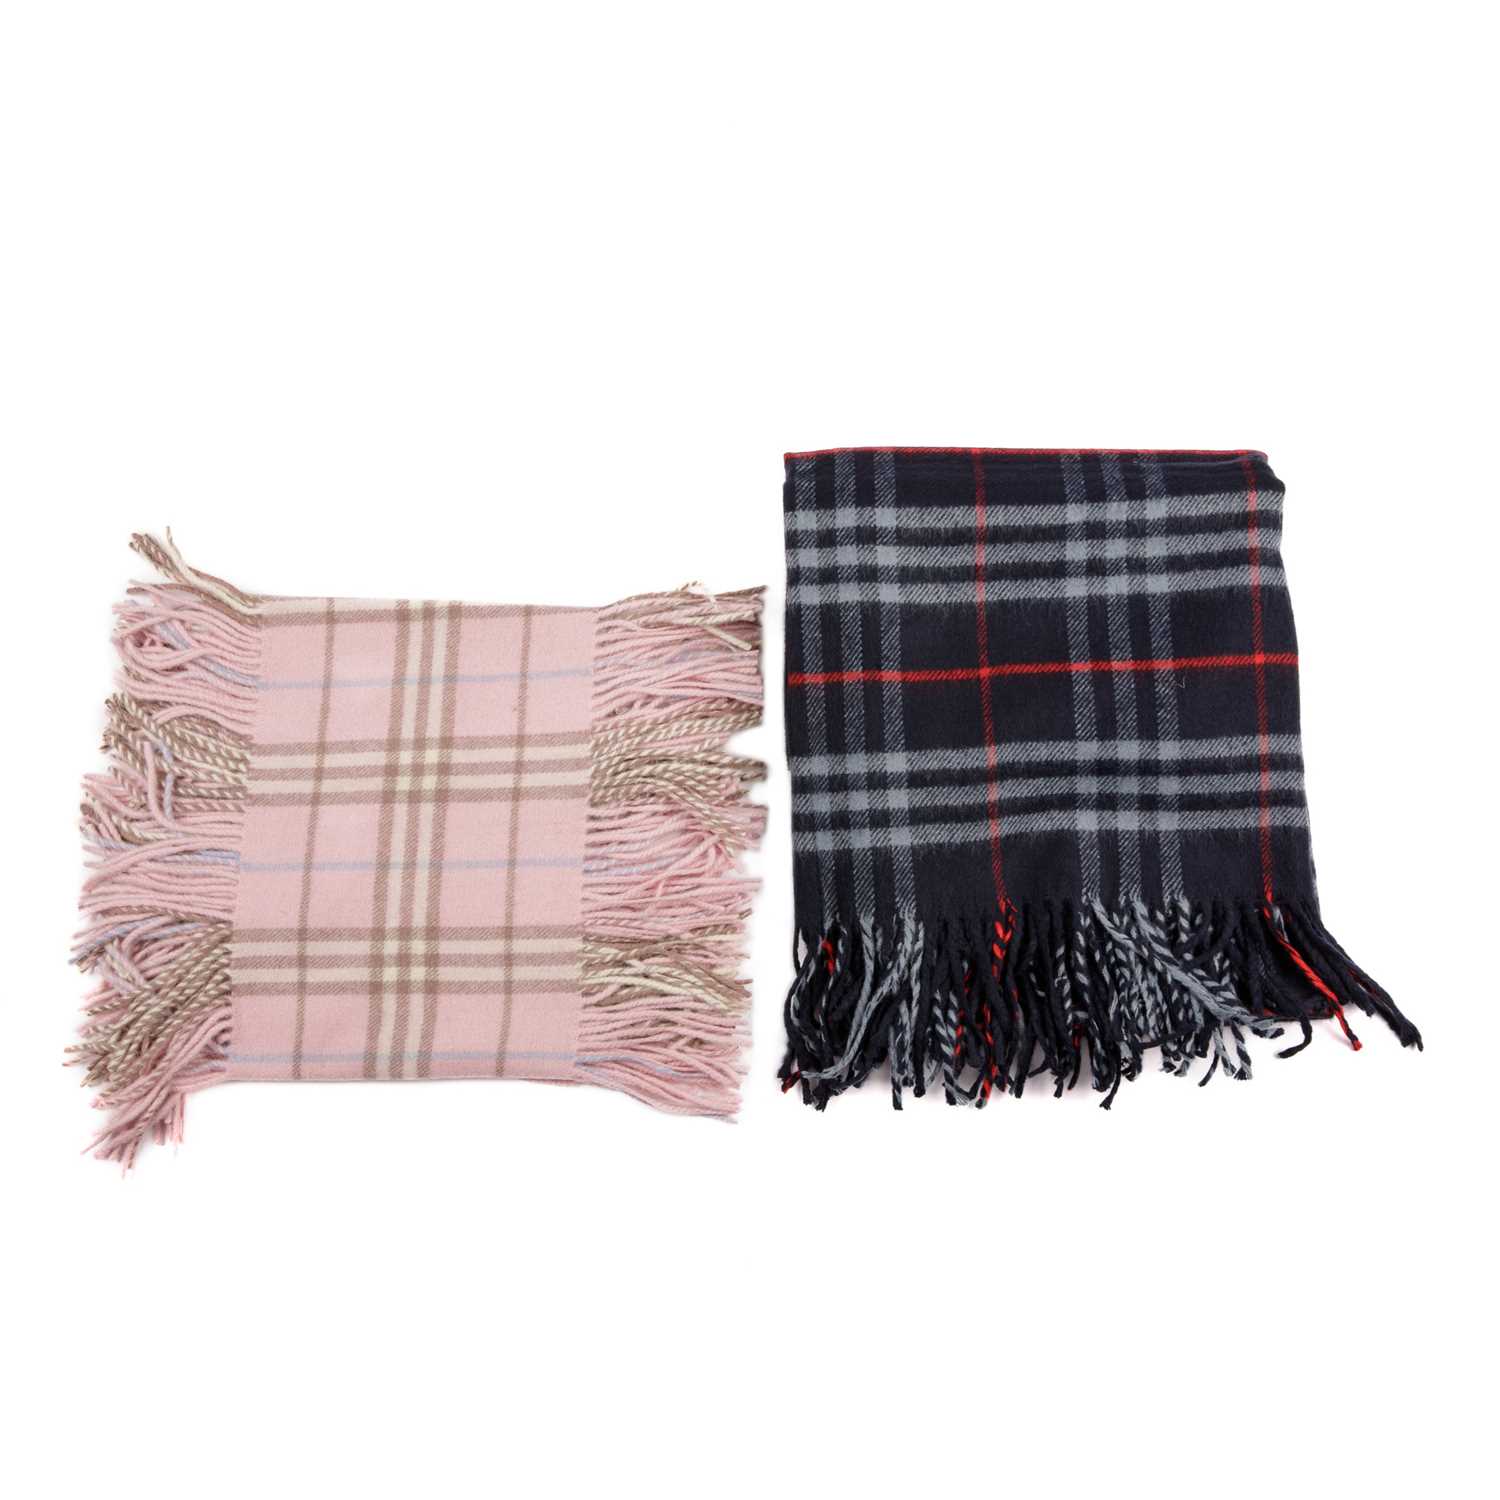 Burberry, a Nova Check lambswool shawl and Happy Fringe scarf, to include a navy blue shawl with